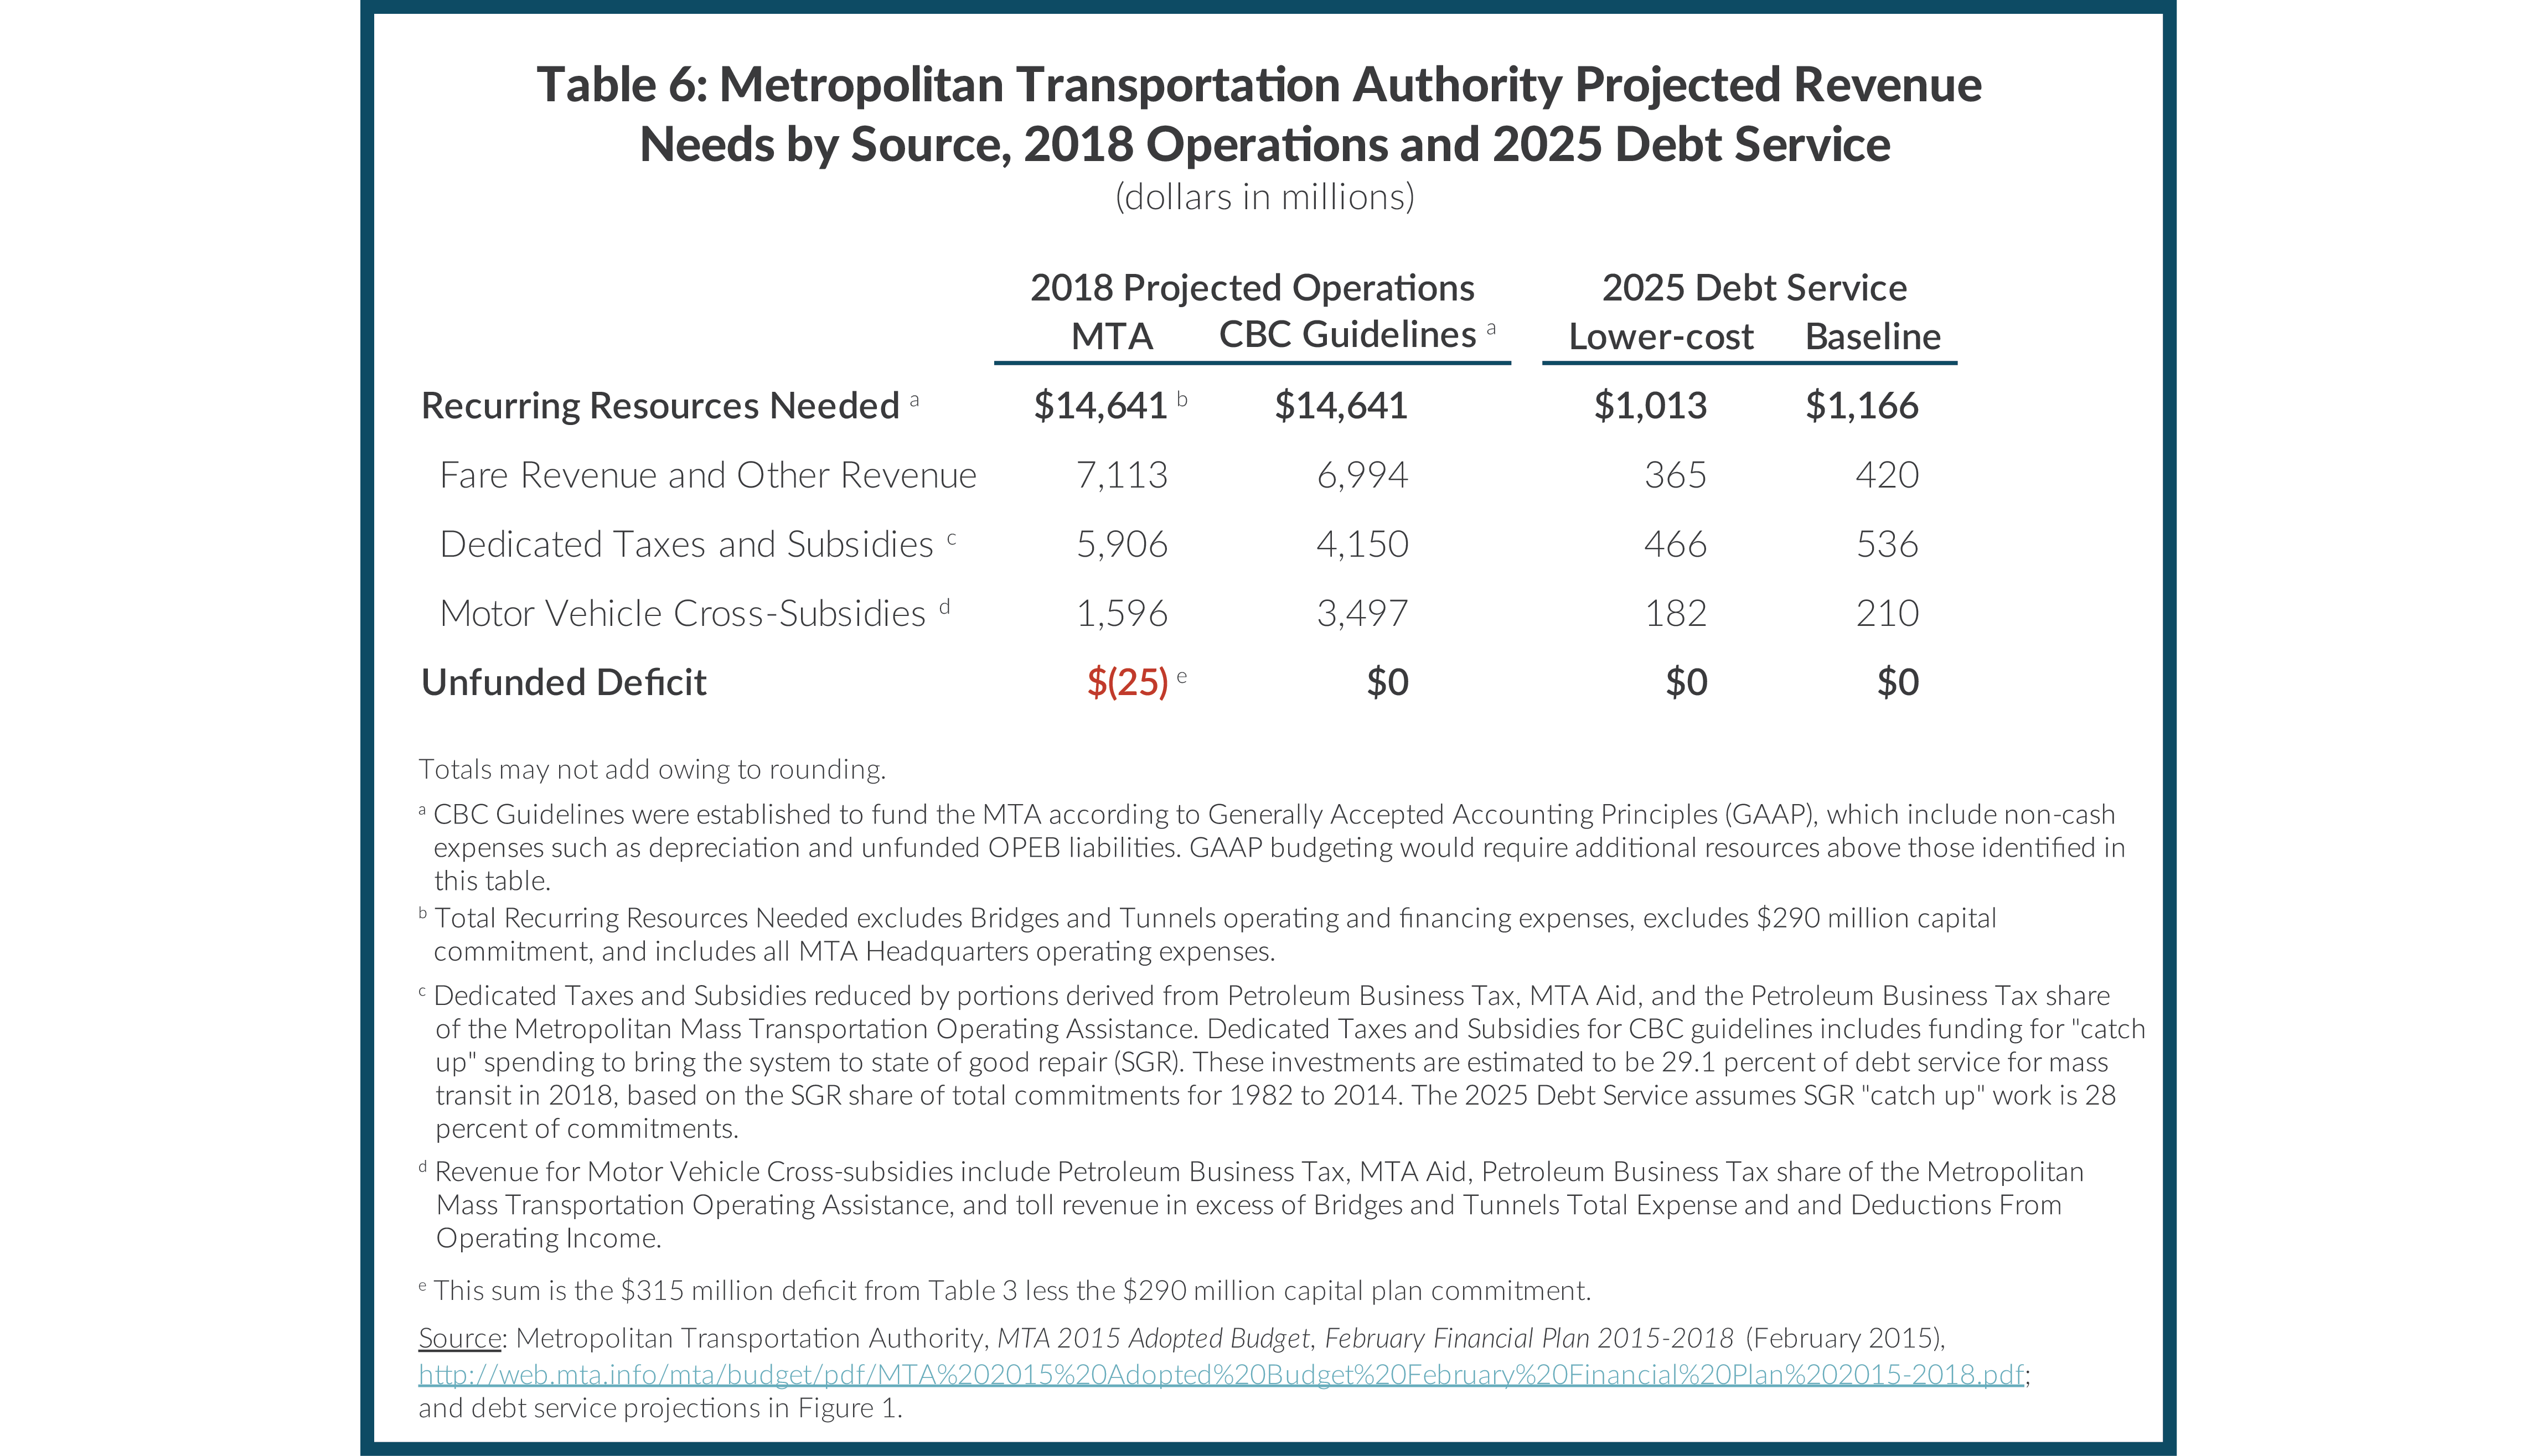 Table 6: Metropolitan Transportation Authority Projected Revenue Needs by Source, 2018 Operations and 2025 Debt Service